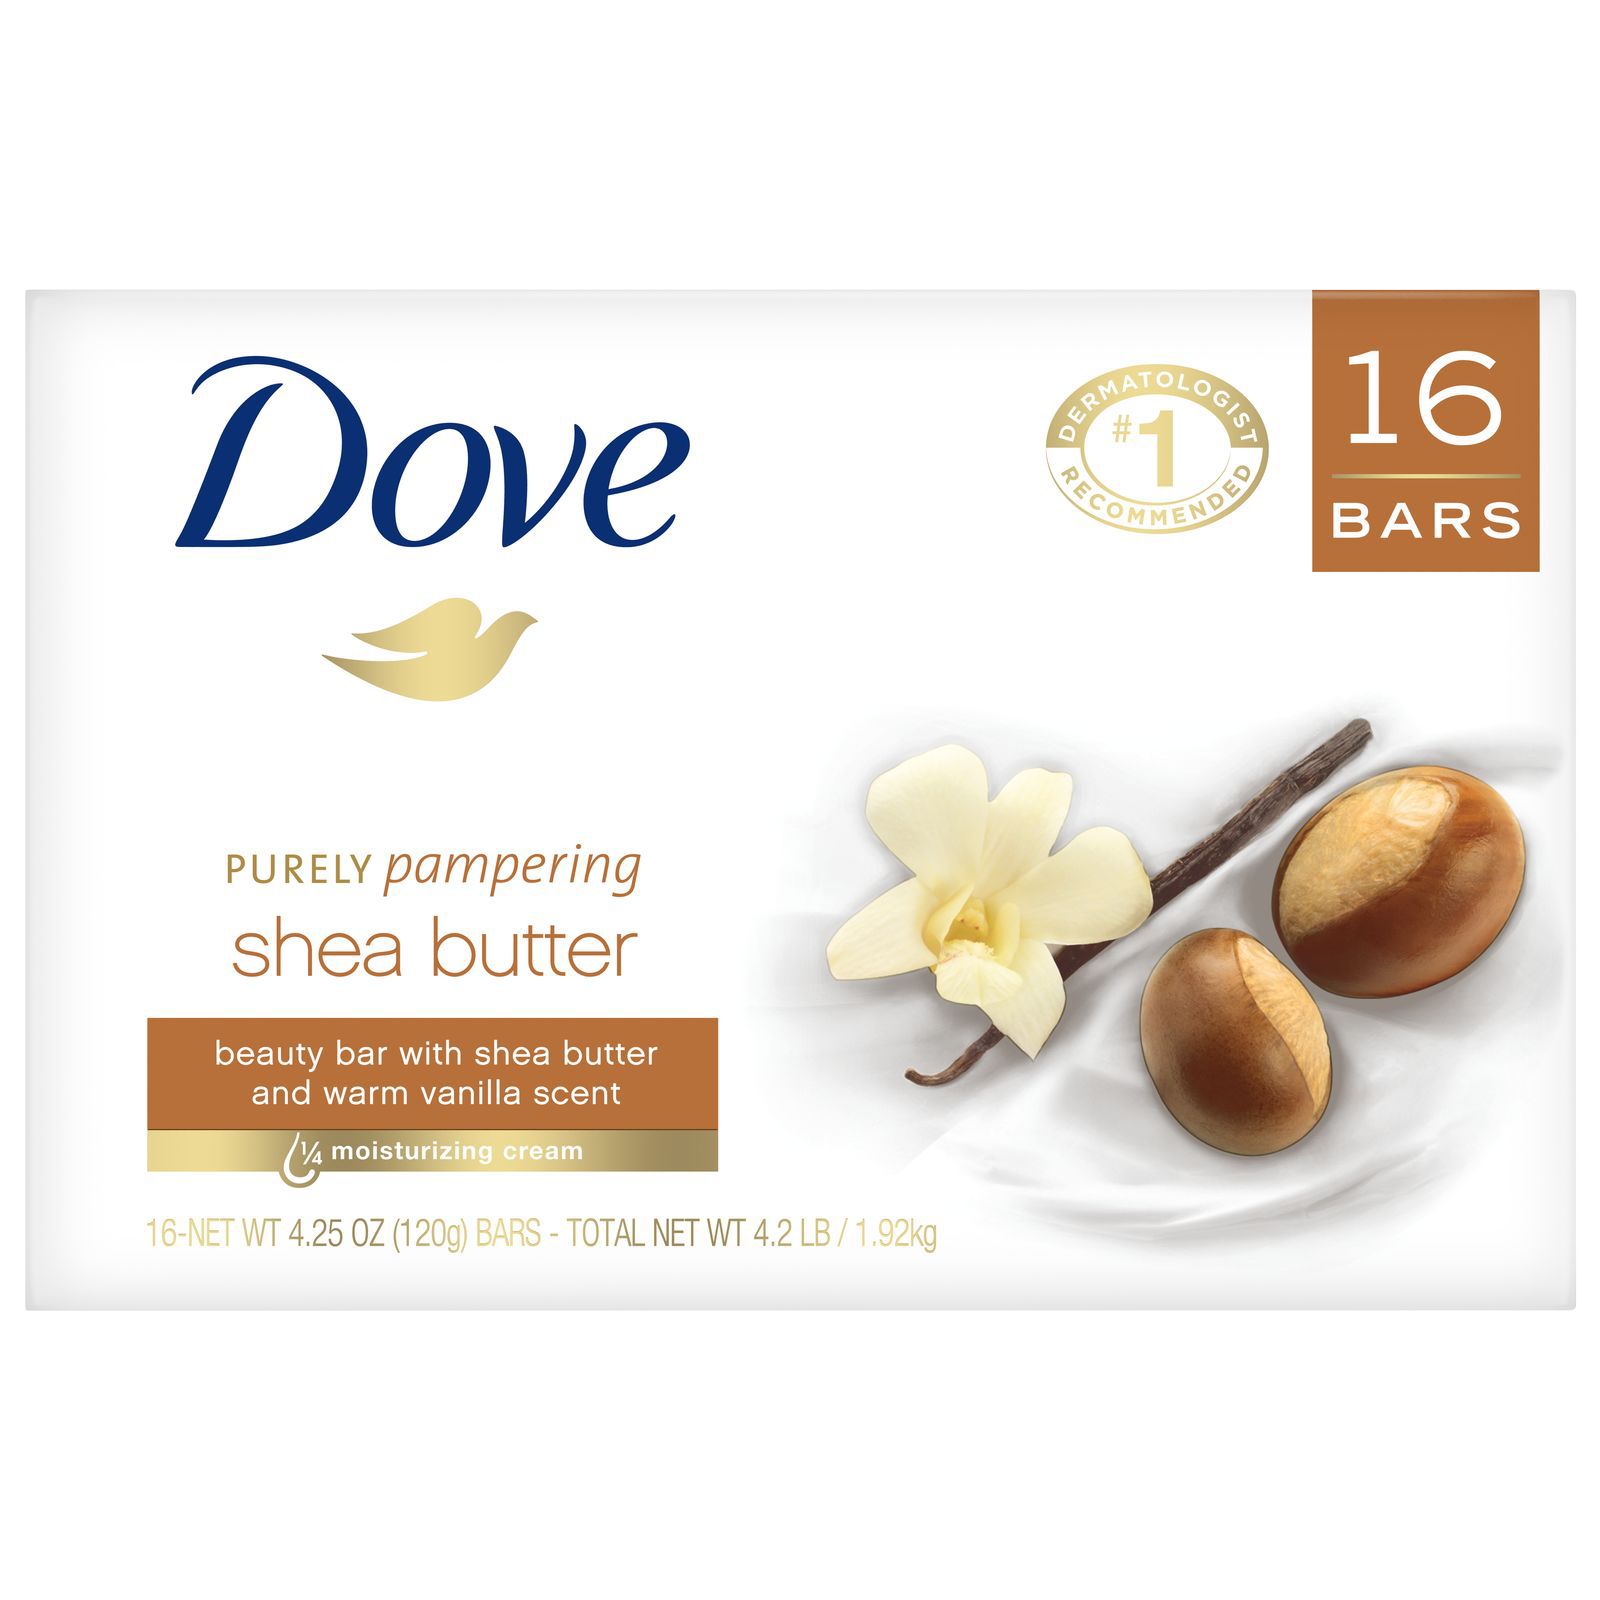 Dove Purely Pampering Shea Butter Beauty Bar 16 Ct 4 Oz Bjs